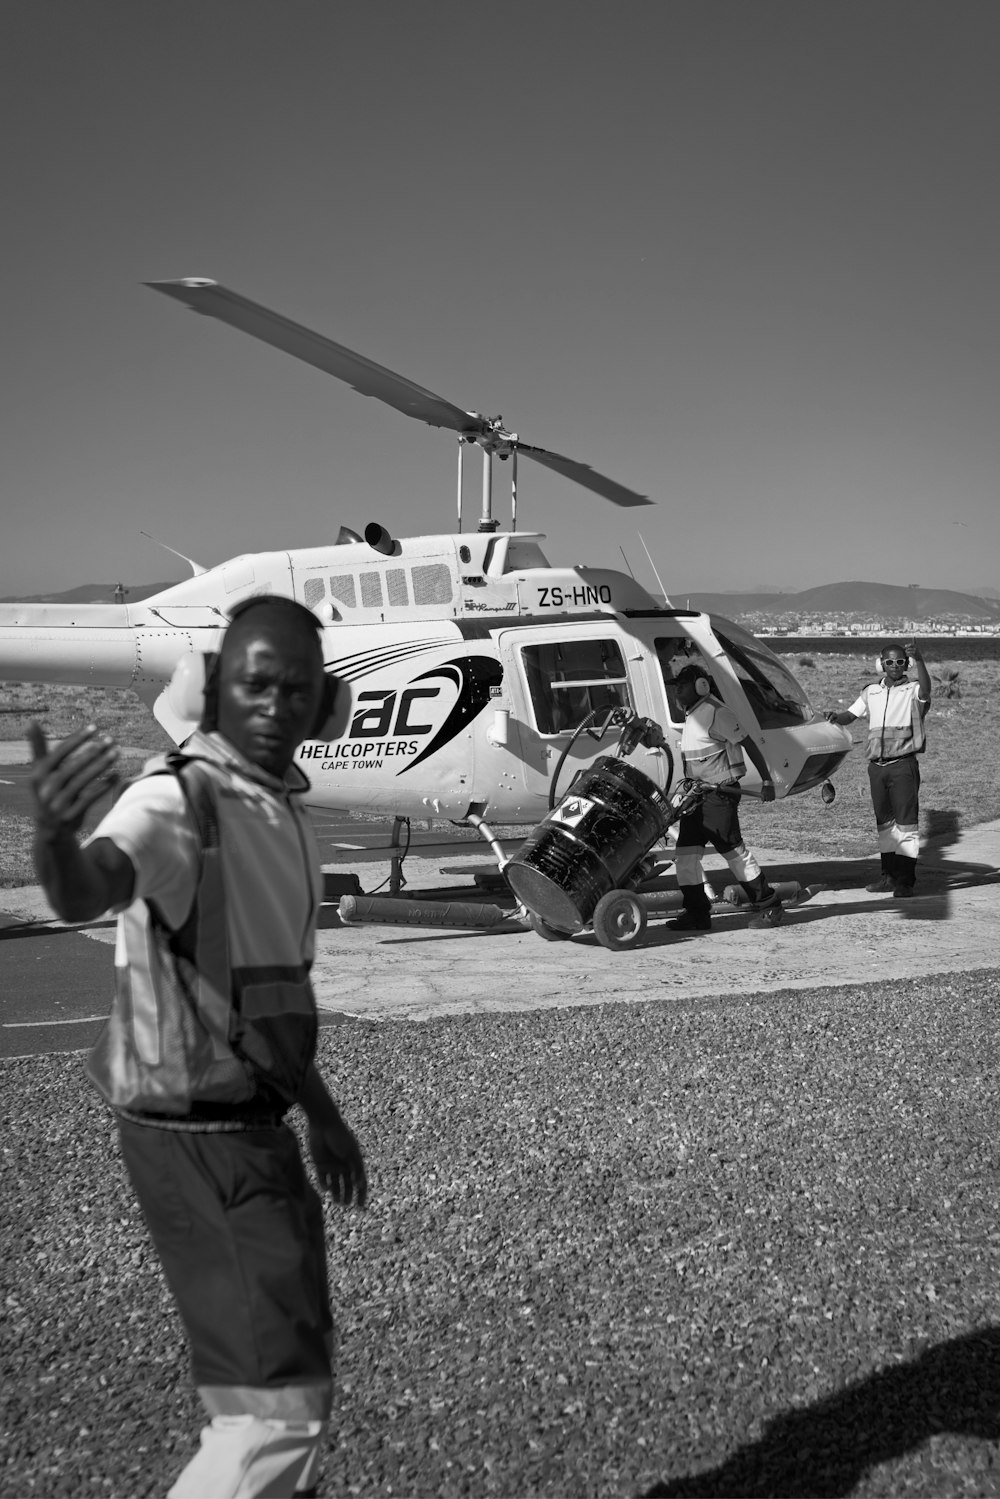 grayscale photo of man in gray shirt and pants standing near white and red helicopter